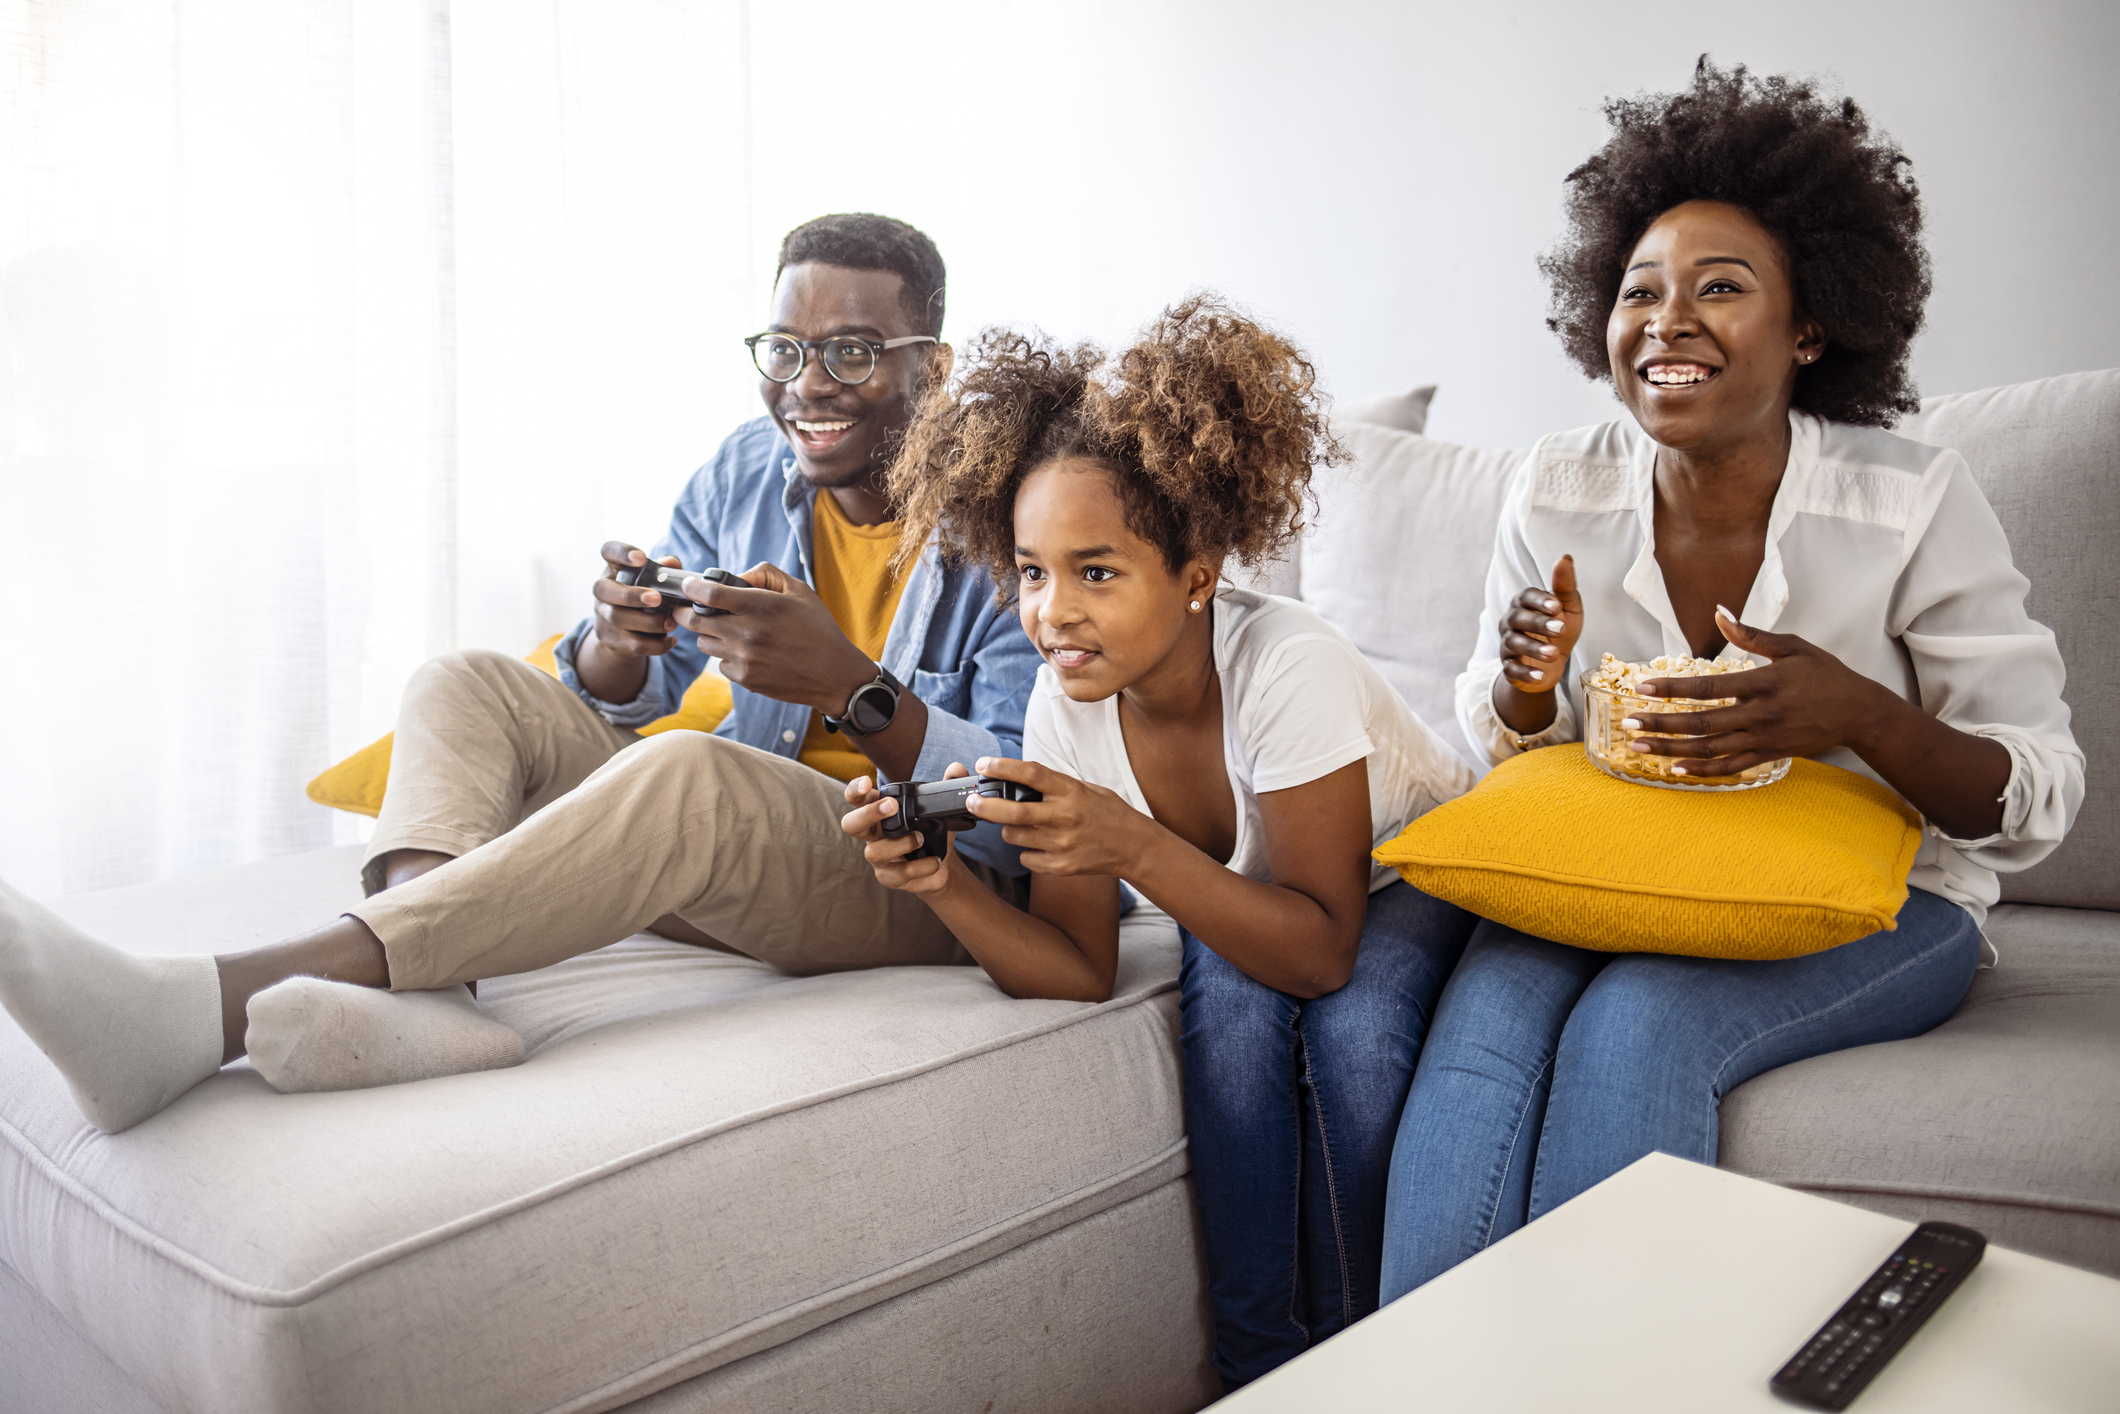 Smiling family sitting on the couch together playing video games